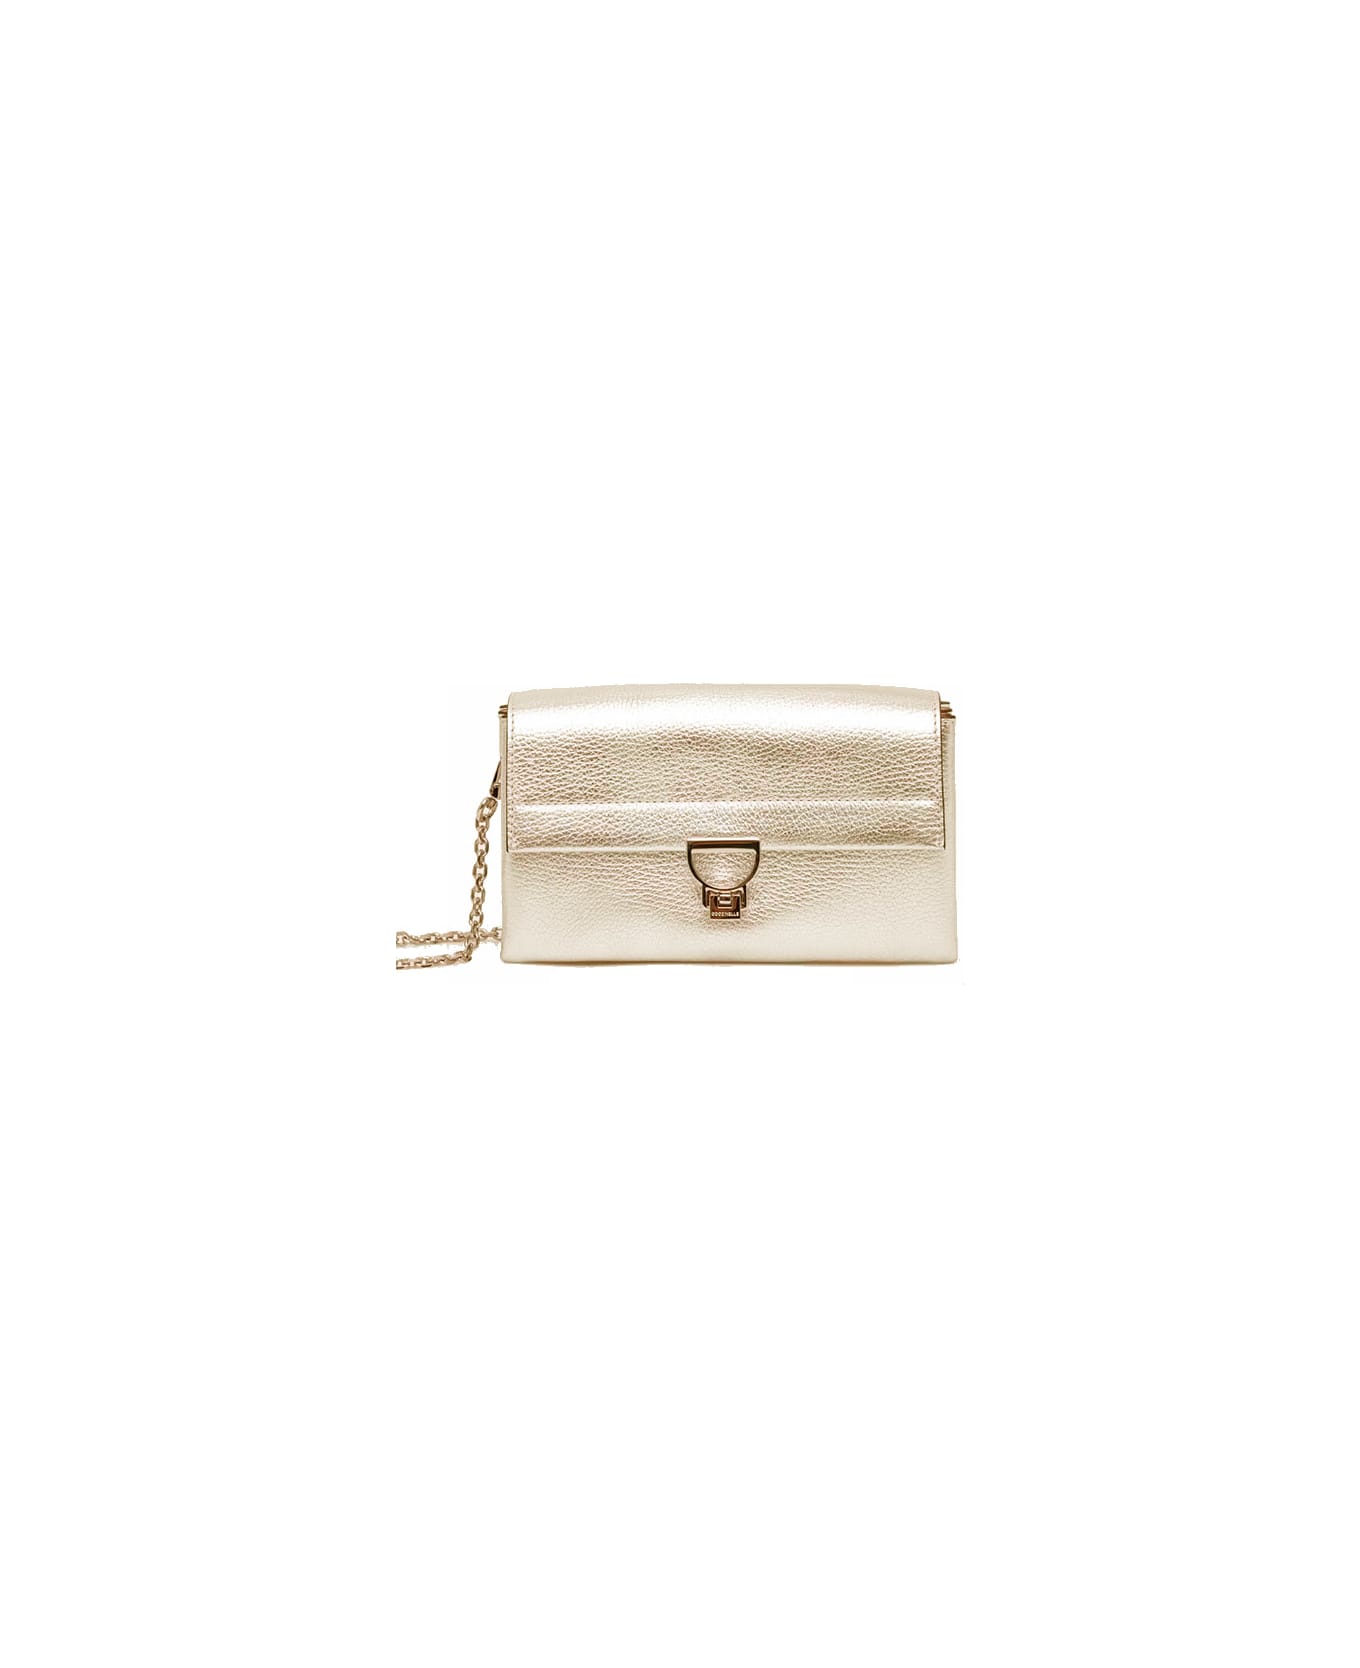 Coccinelle Arlettis Small Bag - Pale gold ショルダーバッグ